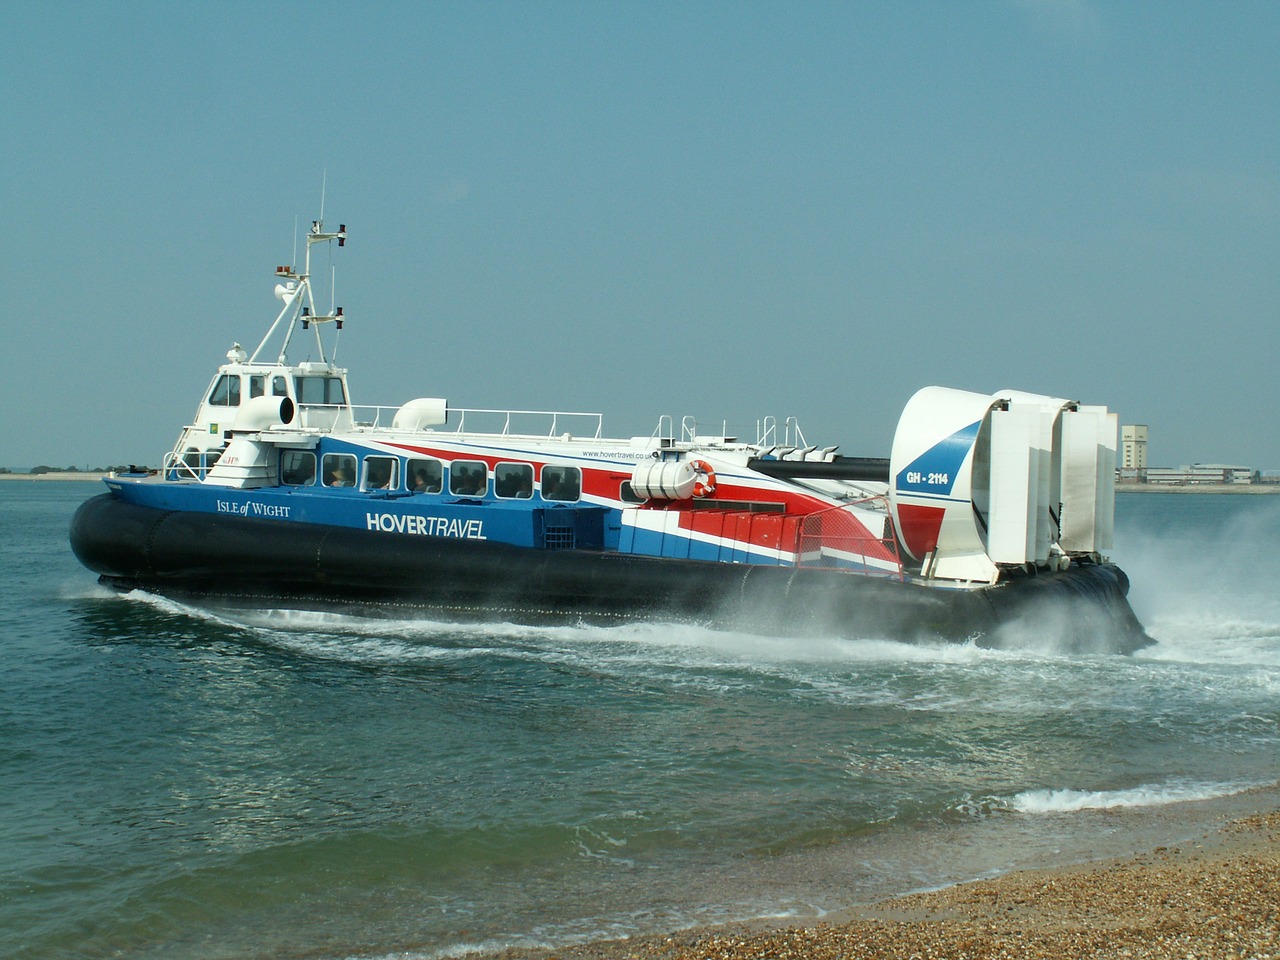 hovercraft,isle of white,beach,free pictures, free photos, free images, royalty free, free illustrations, public domain